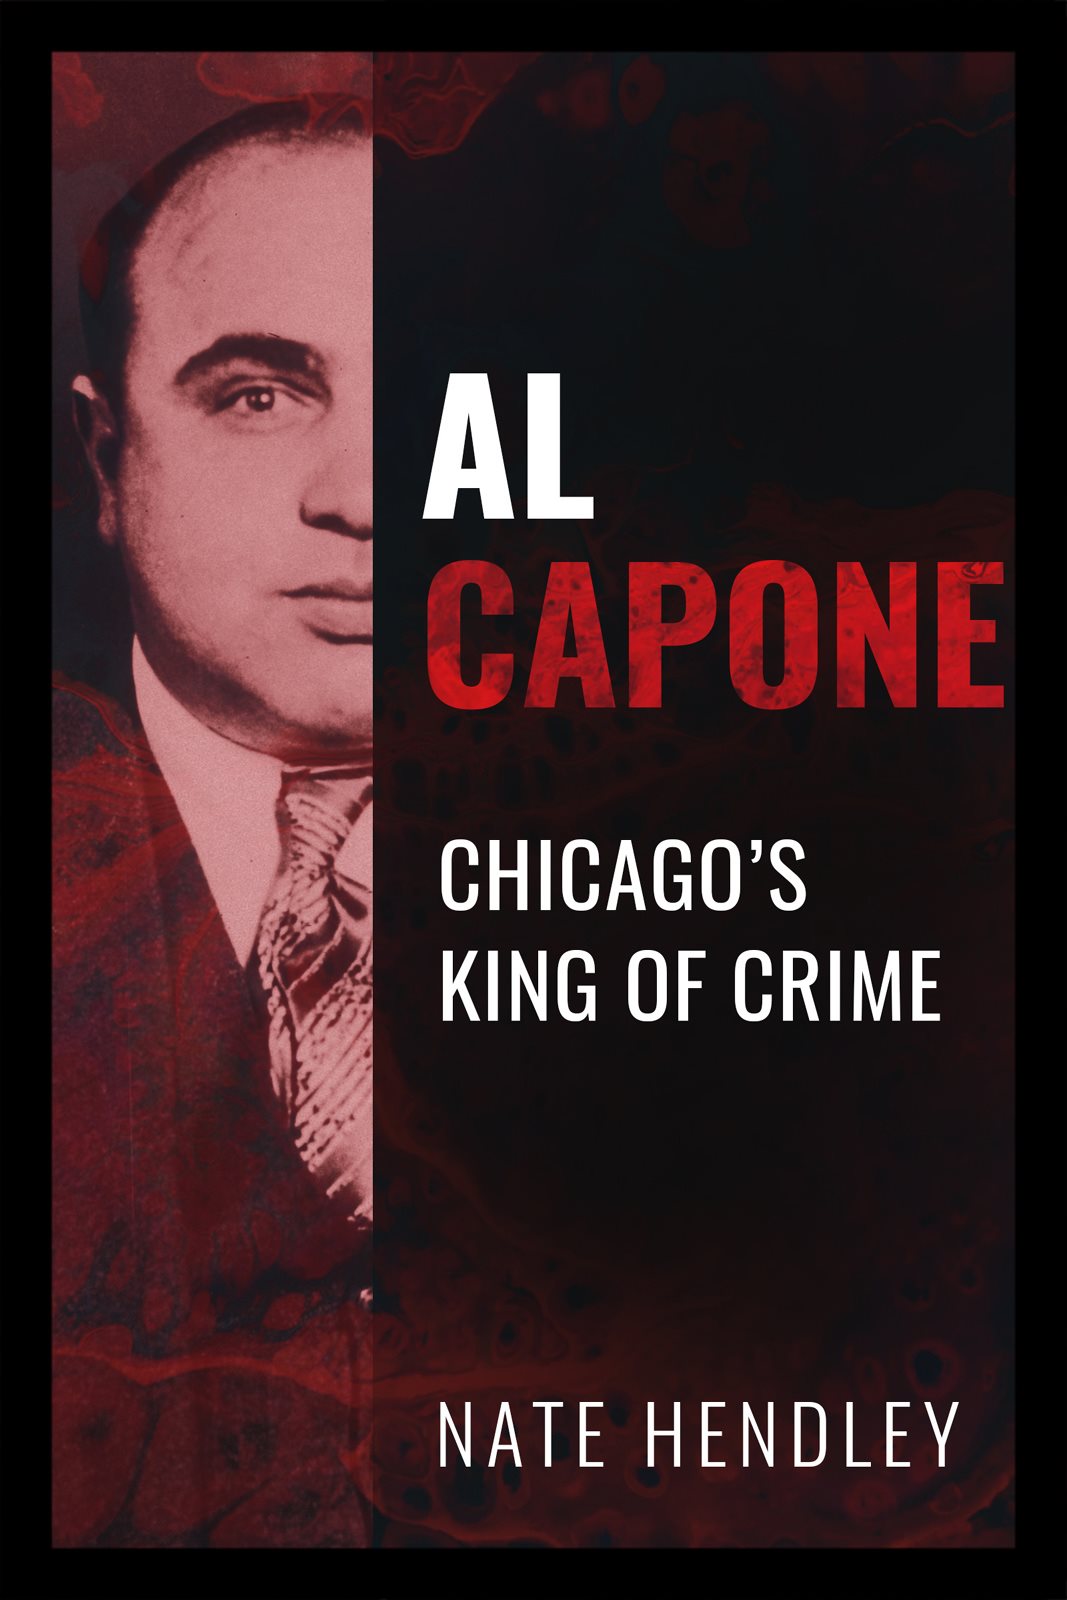 AL CAPONE Chicagos King of Crime Nate Hendley Copyright Nate Hendley 2021 - photo 1